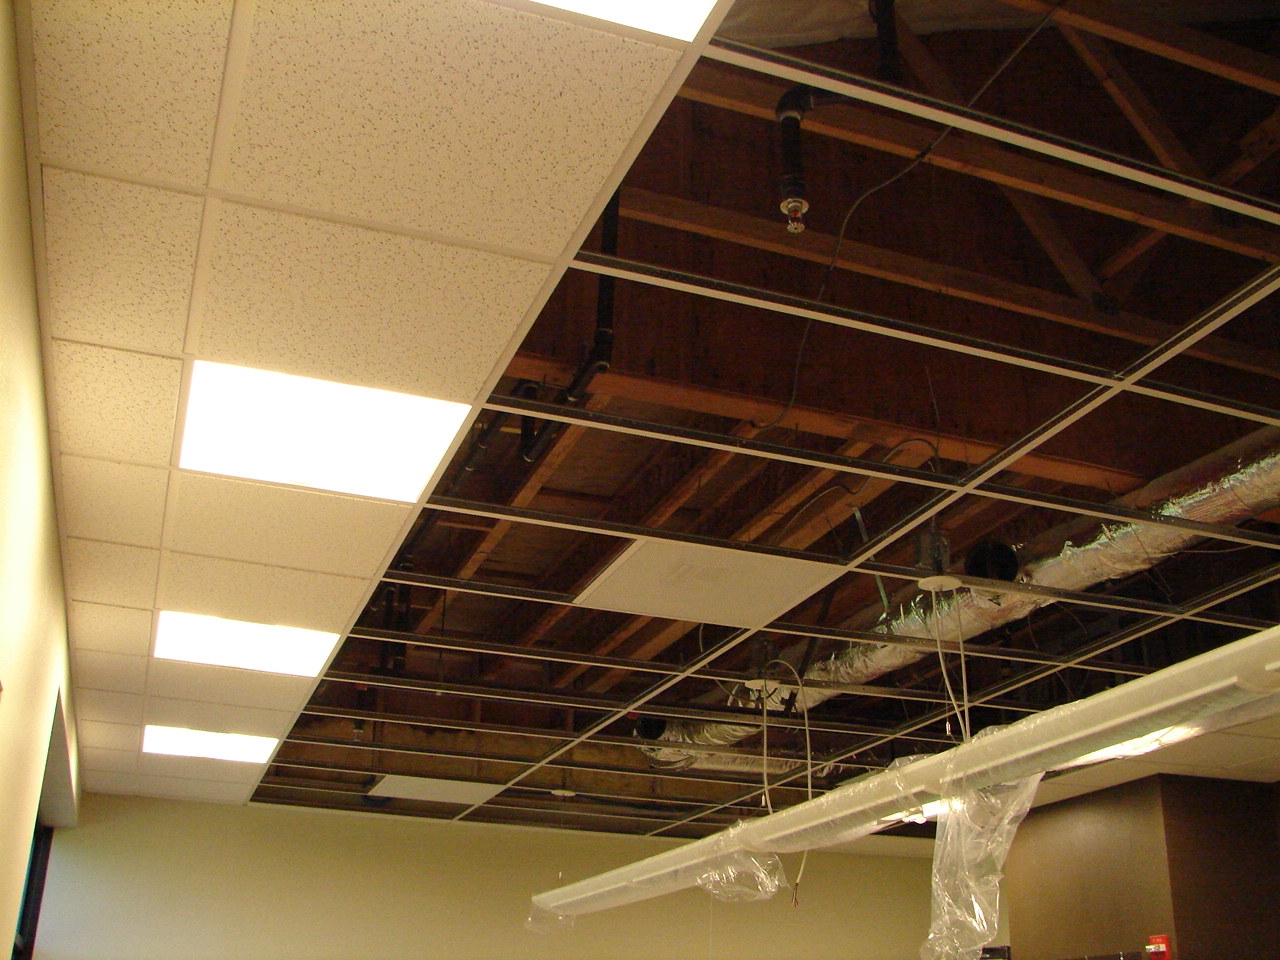 Permalink to Ceiling Tile Lighting Options